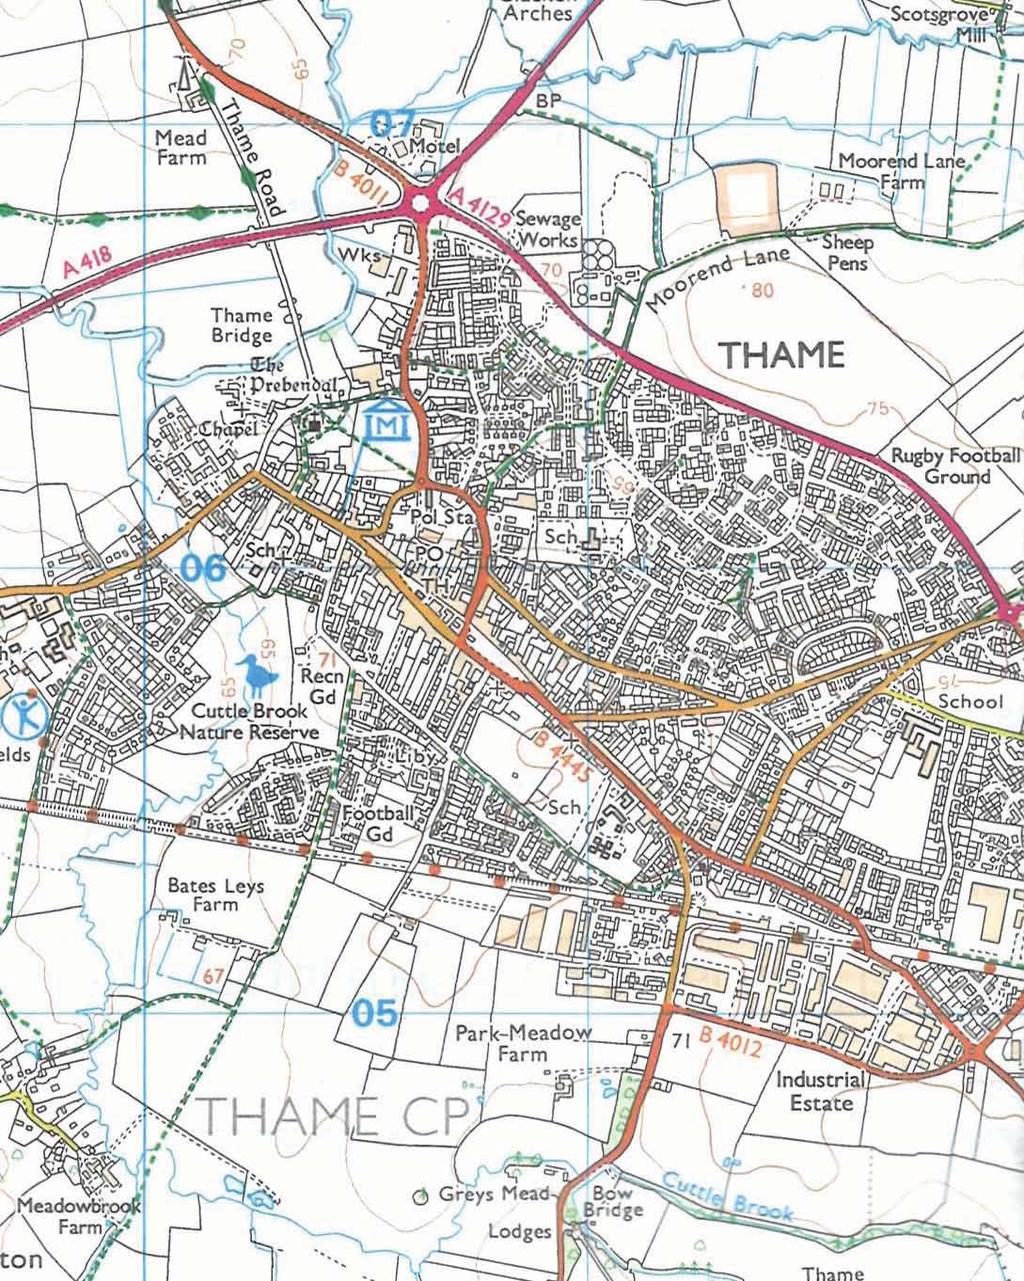 Banbury SITE 07000 Bicester Witney Thame Abingdon OXFORD Wantage Didcot Wallingford Henley-on -Thames 06000 SITE 05000 SP70000 71000 Land at The Elms, Thame, Oxfordshire, 2013